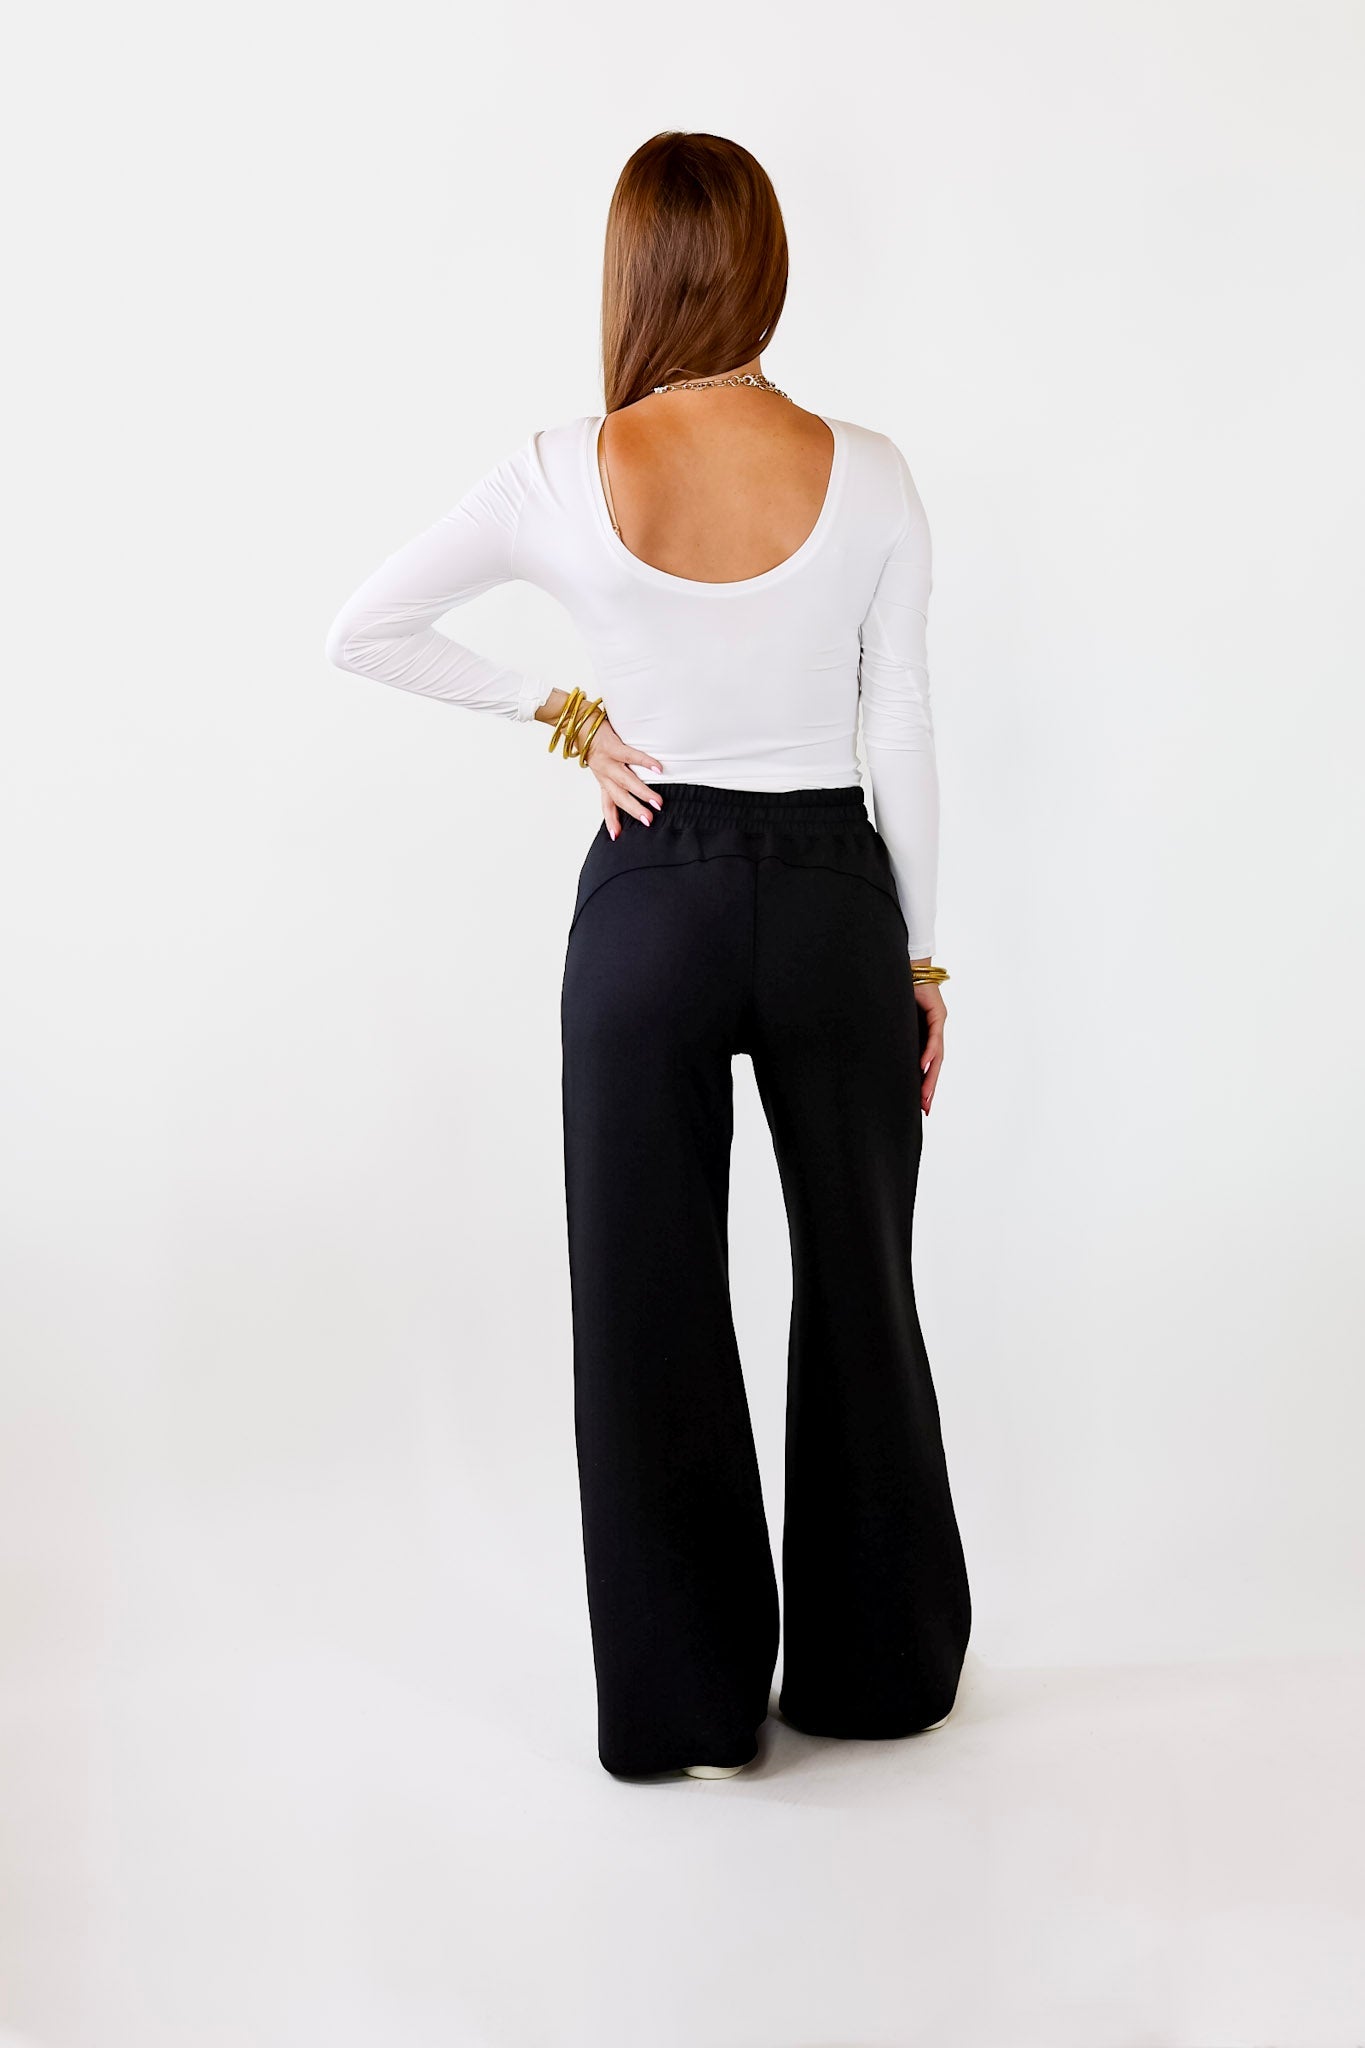 SPANX | Suit Yourself Long Sleeve Scoop Neck Bodysuit in White